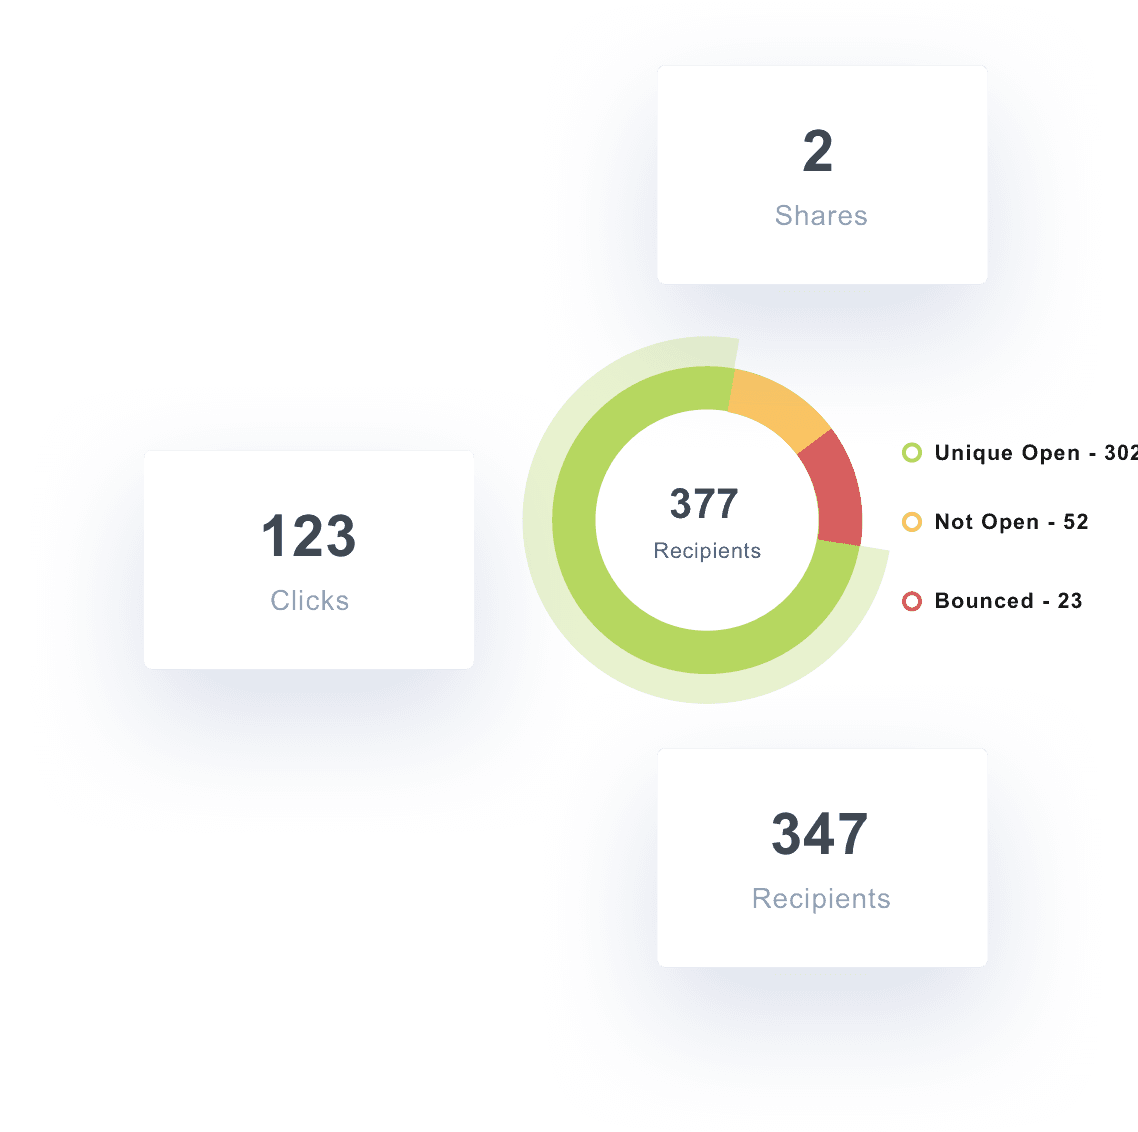 Monitor Active Campaign Performance